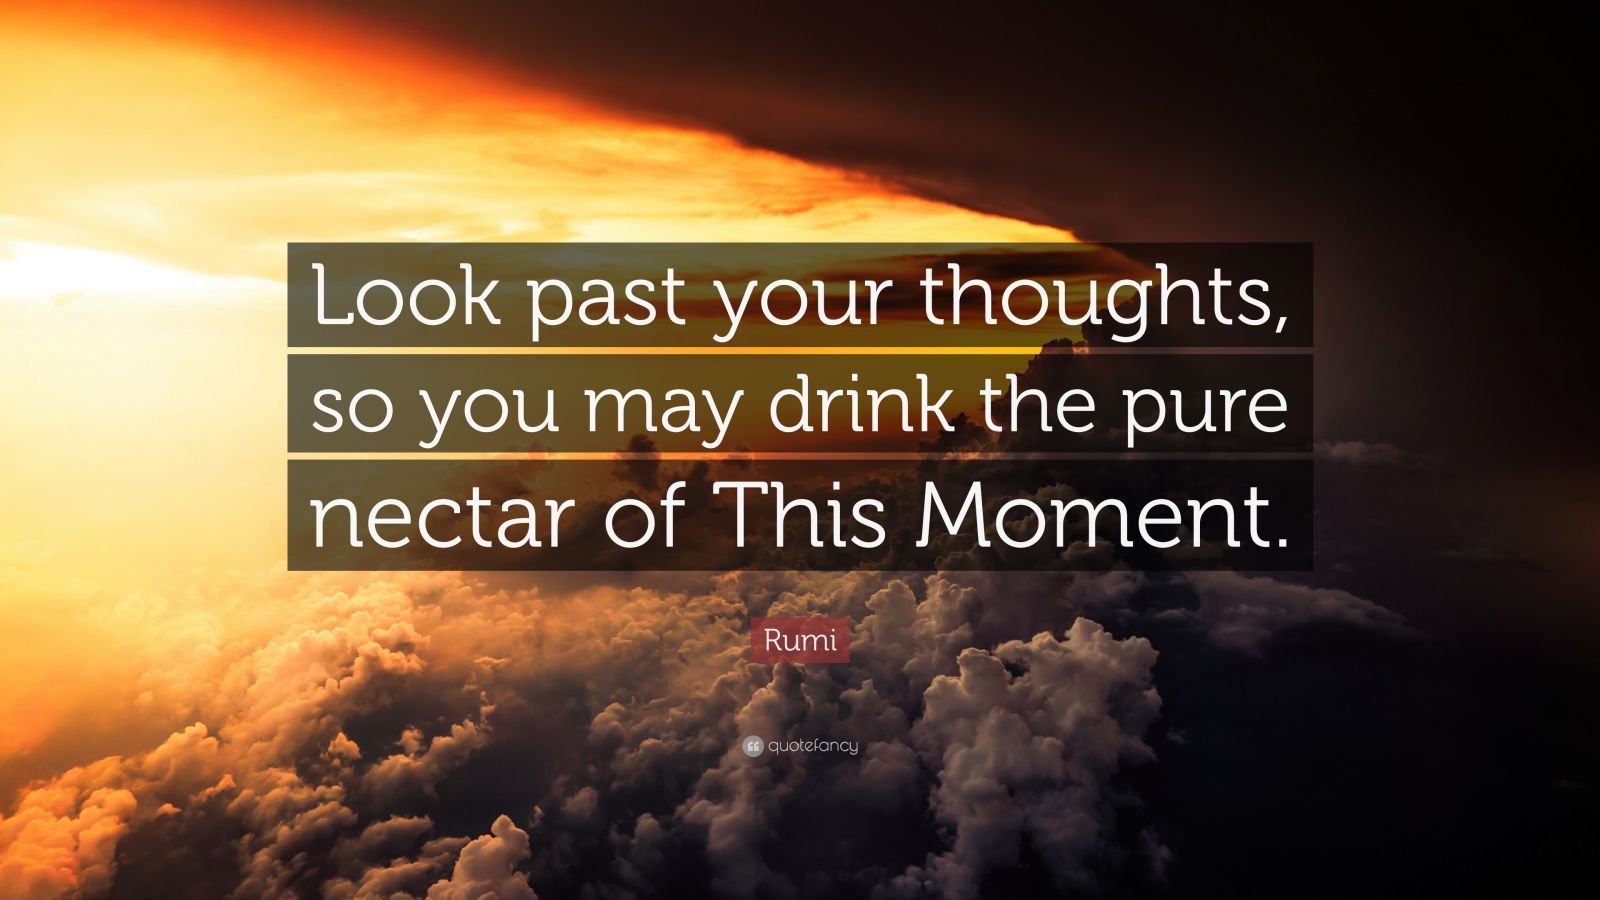 Rumi Quote: “Look past your thoughts, so you may drink the pure nectar ...